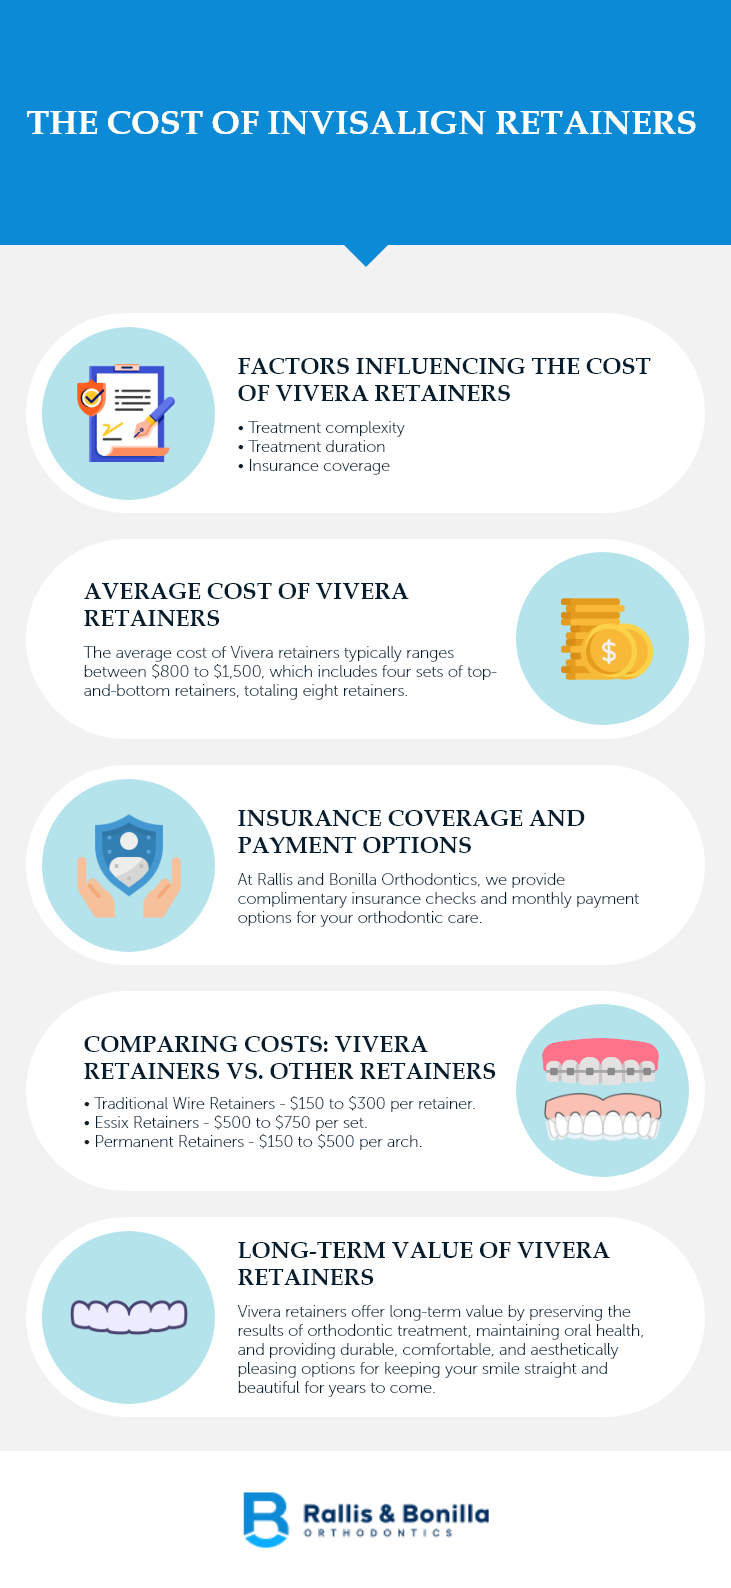 The Cost of Invisalign Retainers